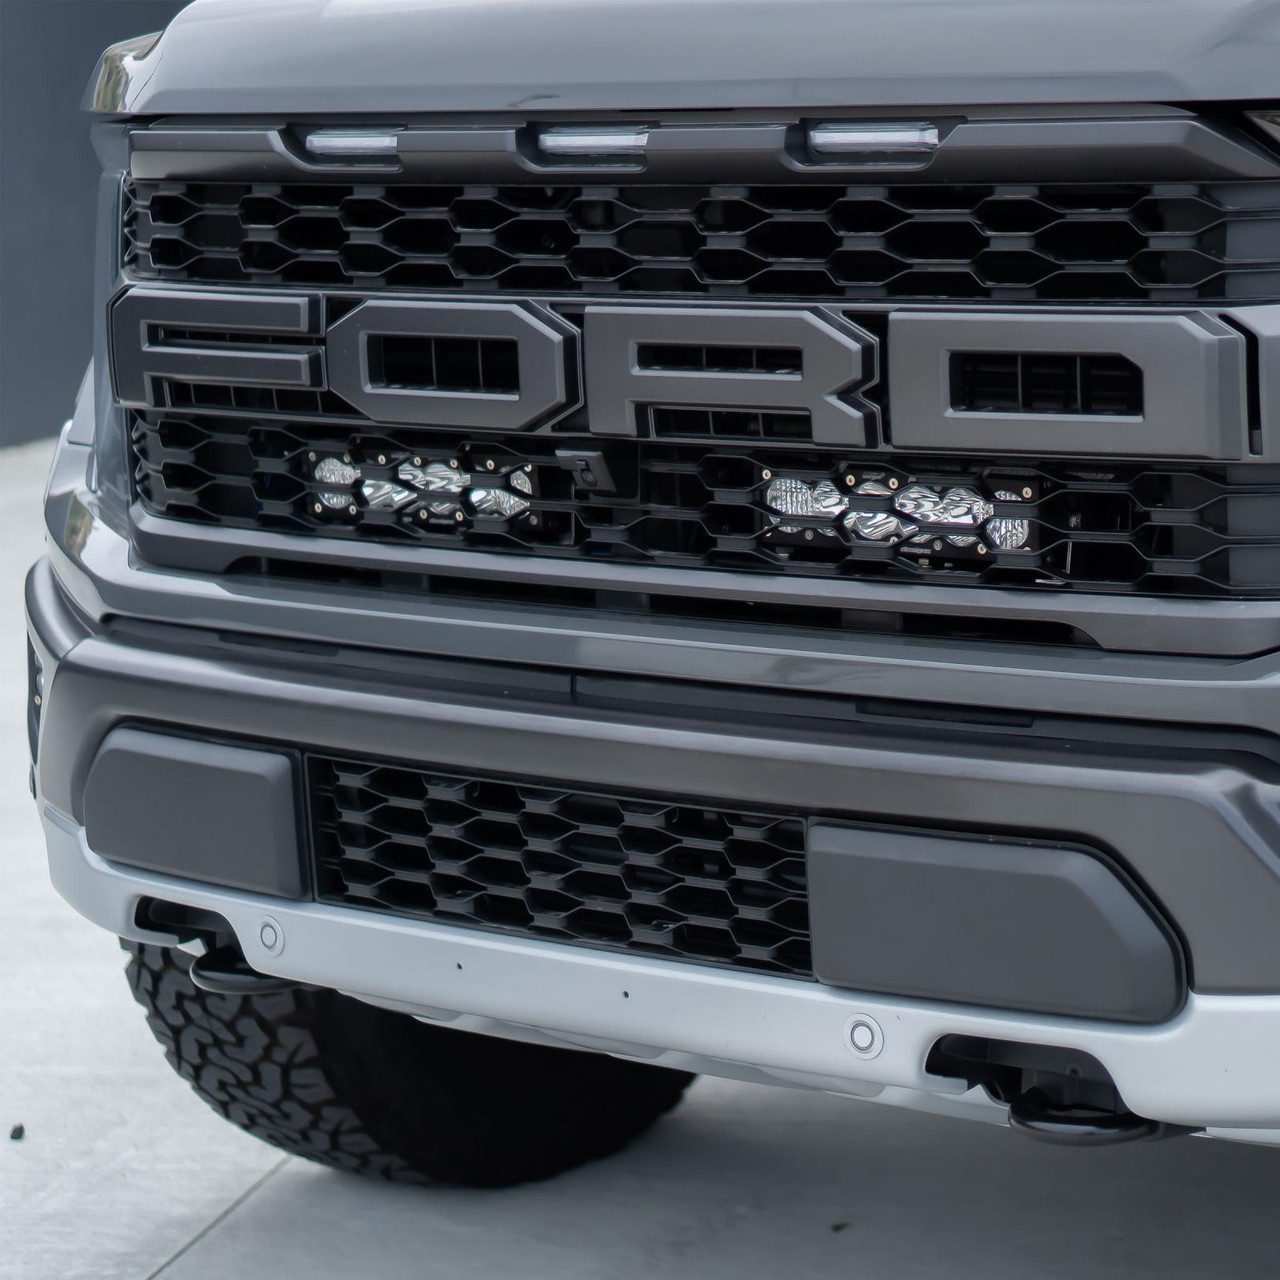 Ford OnX6+ 10 Inch Dual Behind Grille Light Bar Kit Ford 2021-24 F-150, NOTE: Raptor